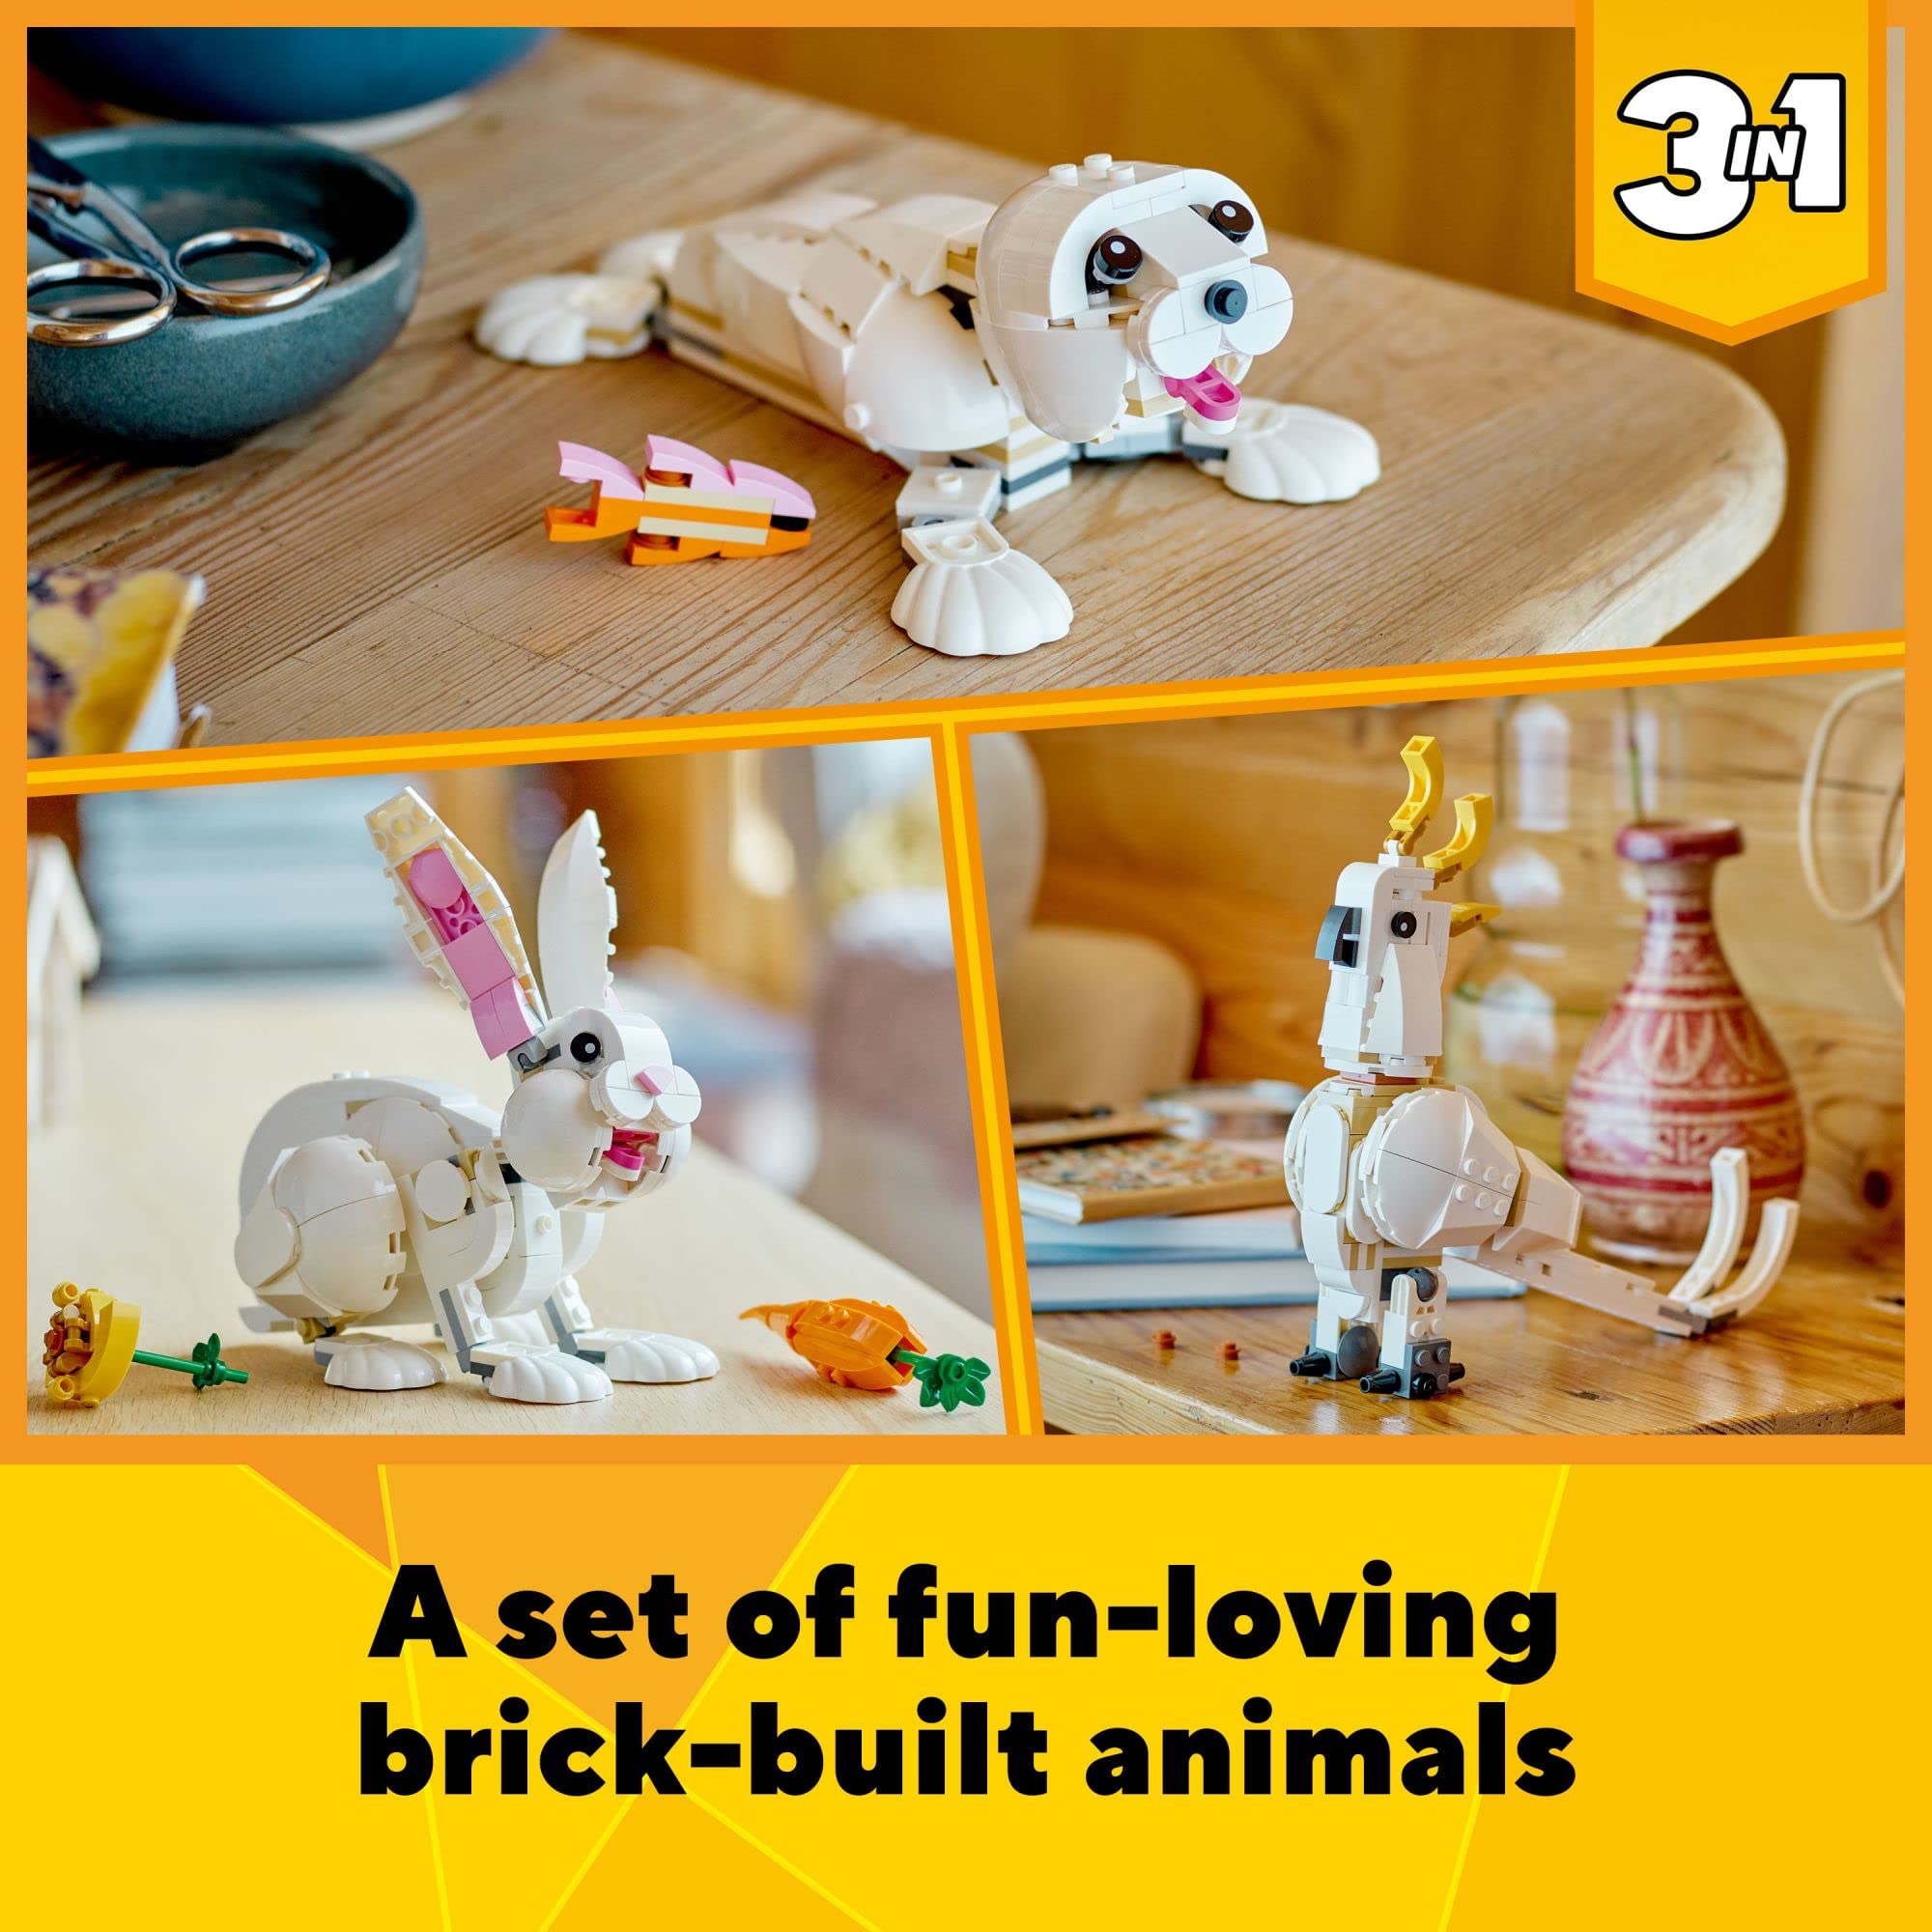 LEGO Creator 3-in-1 White Rabbit Animal Toy Building Set 31133, STEM Toy for Kids 8+, Transforms from Bunny to Seal to Parrot Figures, Creative Play Building Toy for Boys and Girls